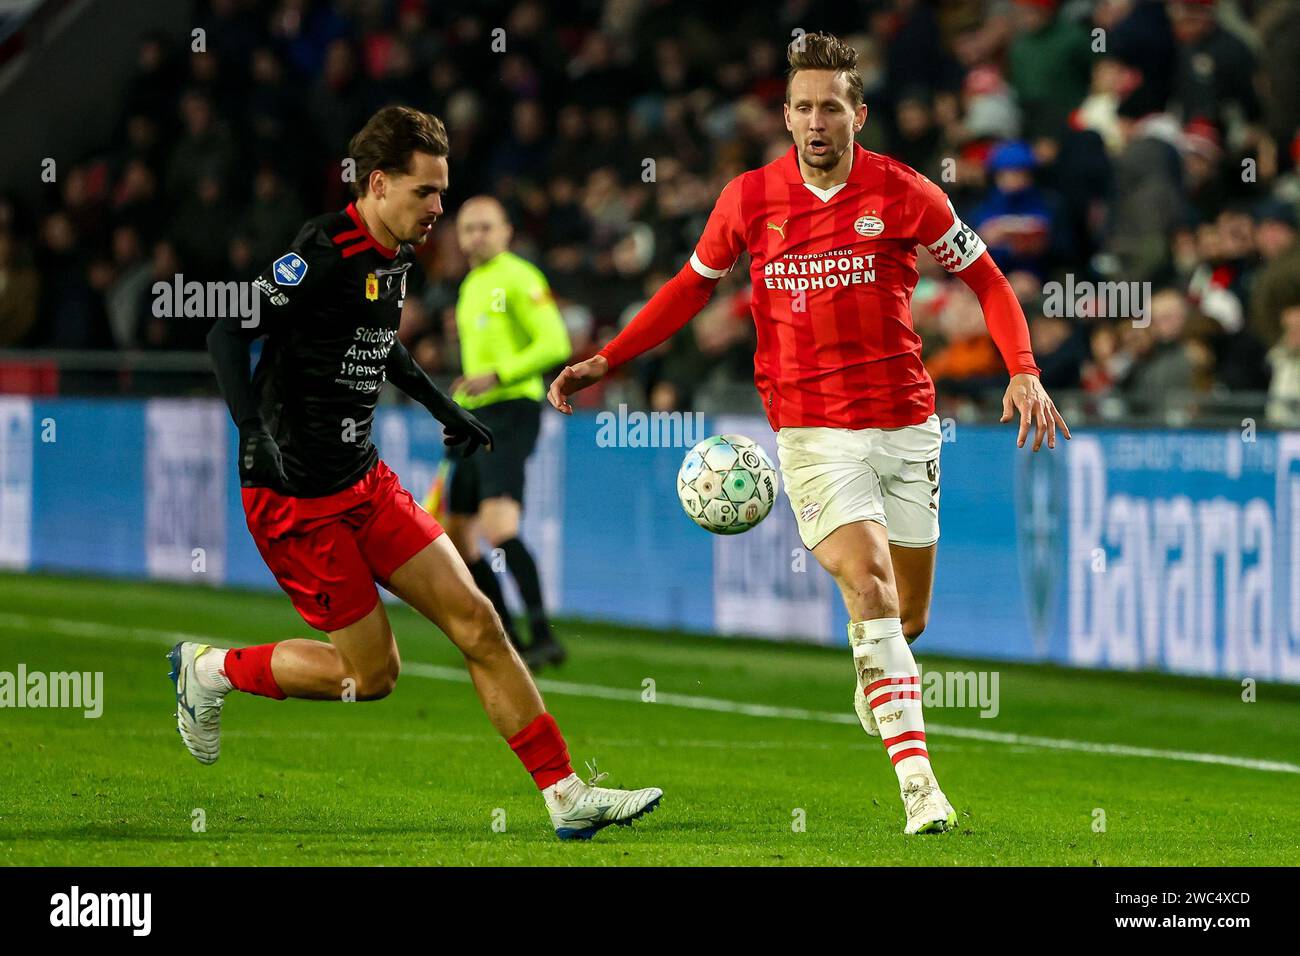 EINDHOVEN, 13-01-2024, Philips Stadium, Dutch football Eredivisie season 2023 / 2024, Match between PSV - Excelsior, PSV player Luuk de Jong(R) in action during the match PSV - Excelsior Stock Photo